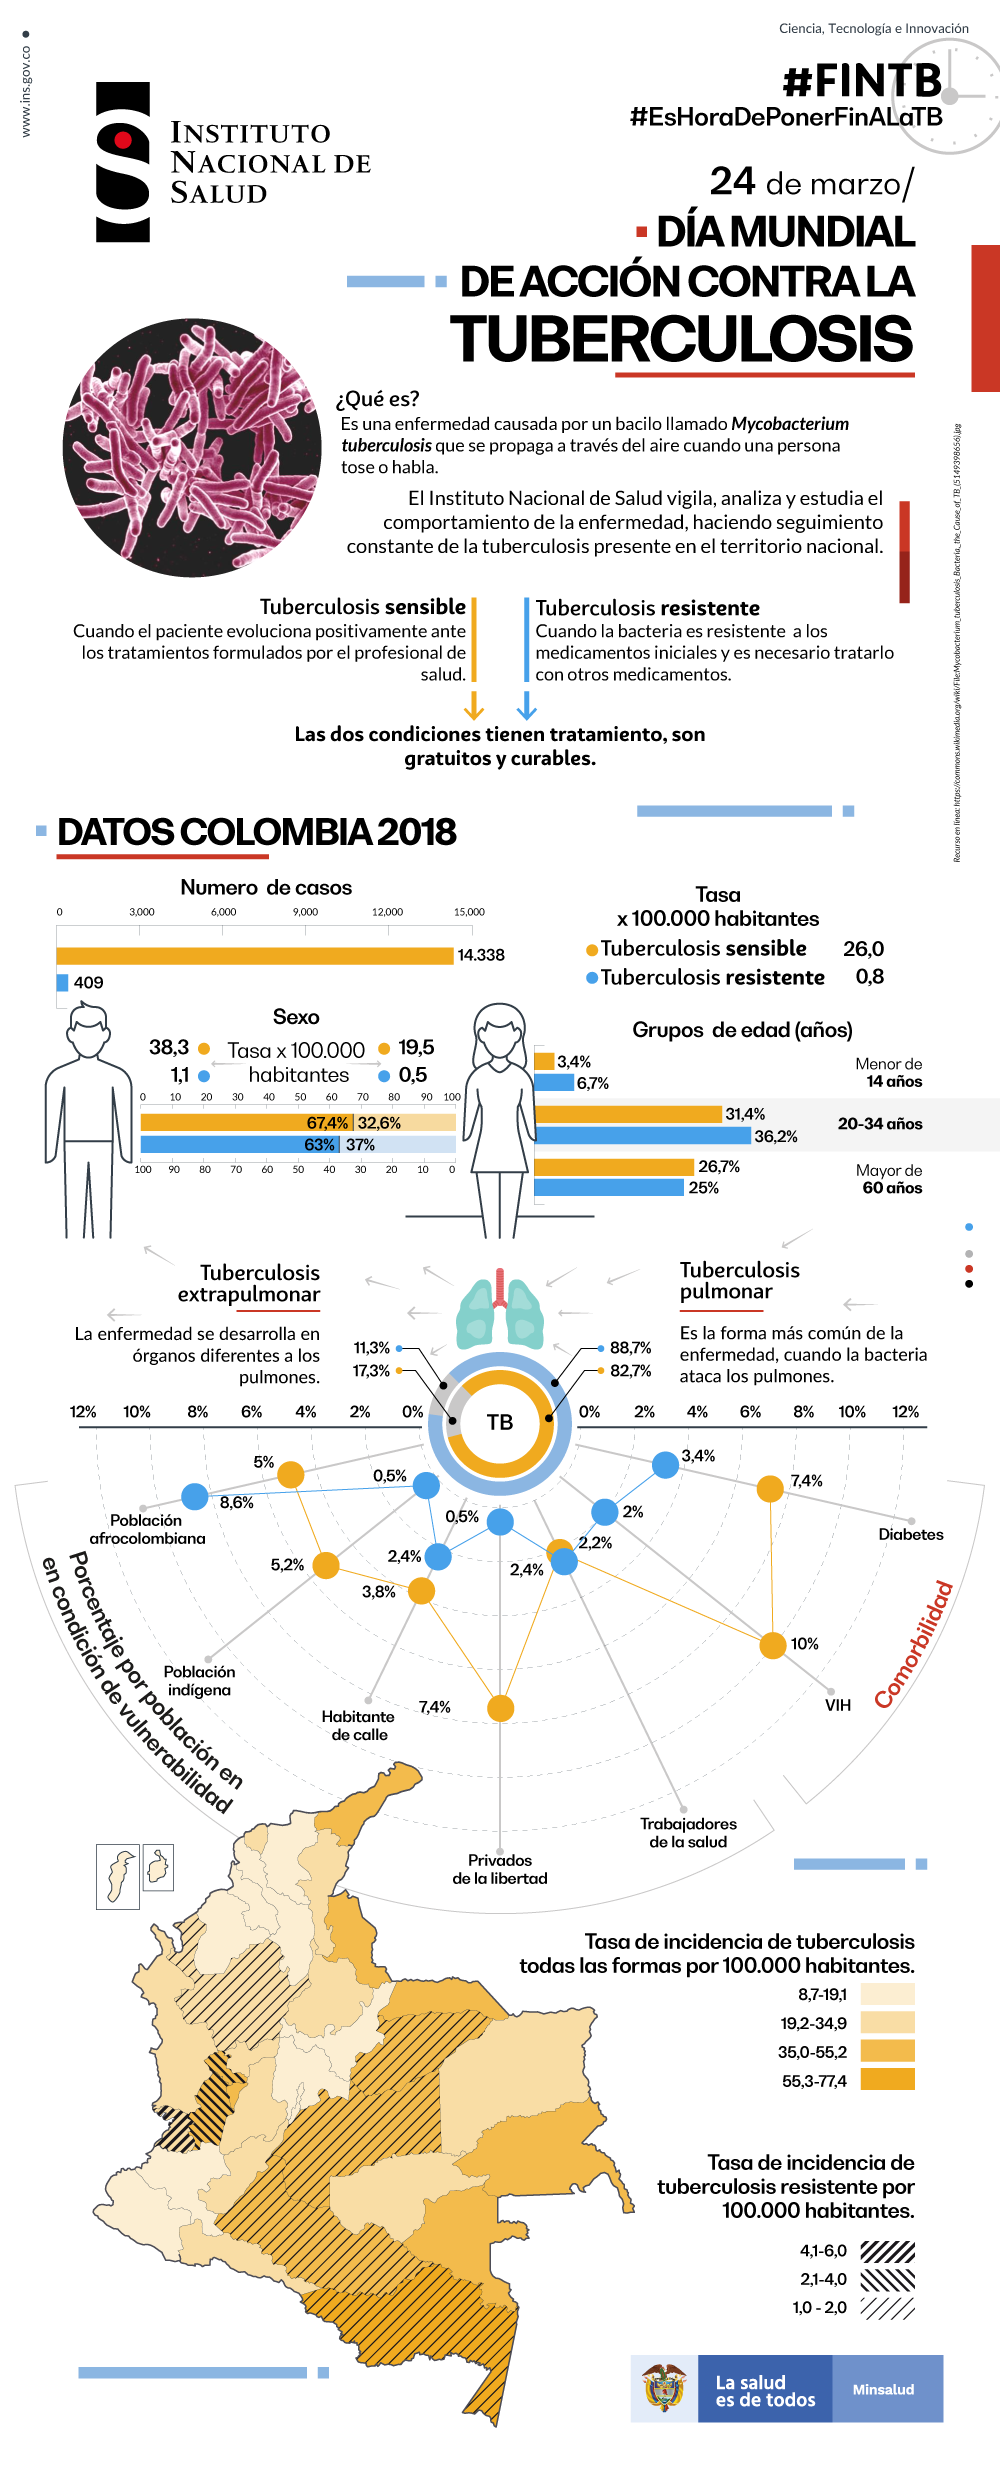 https://www.ins.gov.co/Noticias/Tuberculosis/FINTB-INS-INSTITUTO-NACIONAL-COLOMBIA-TUBERCULOSIS-2019.png